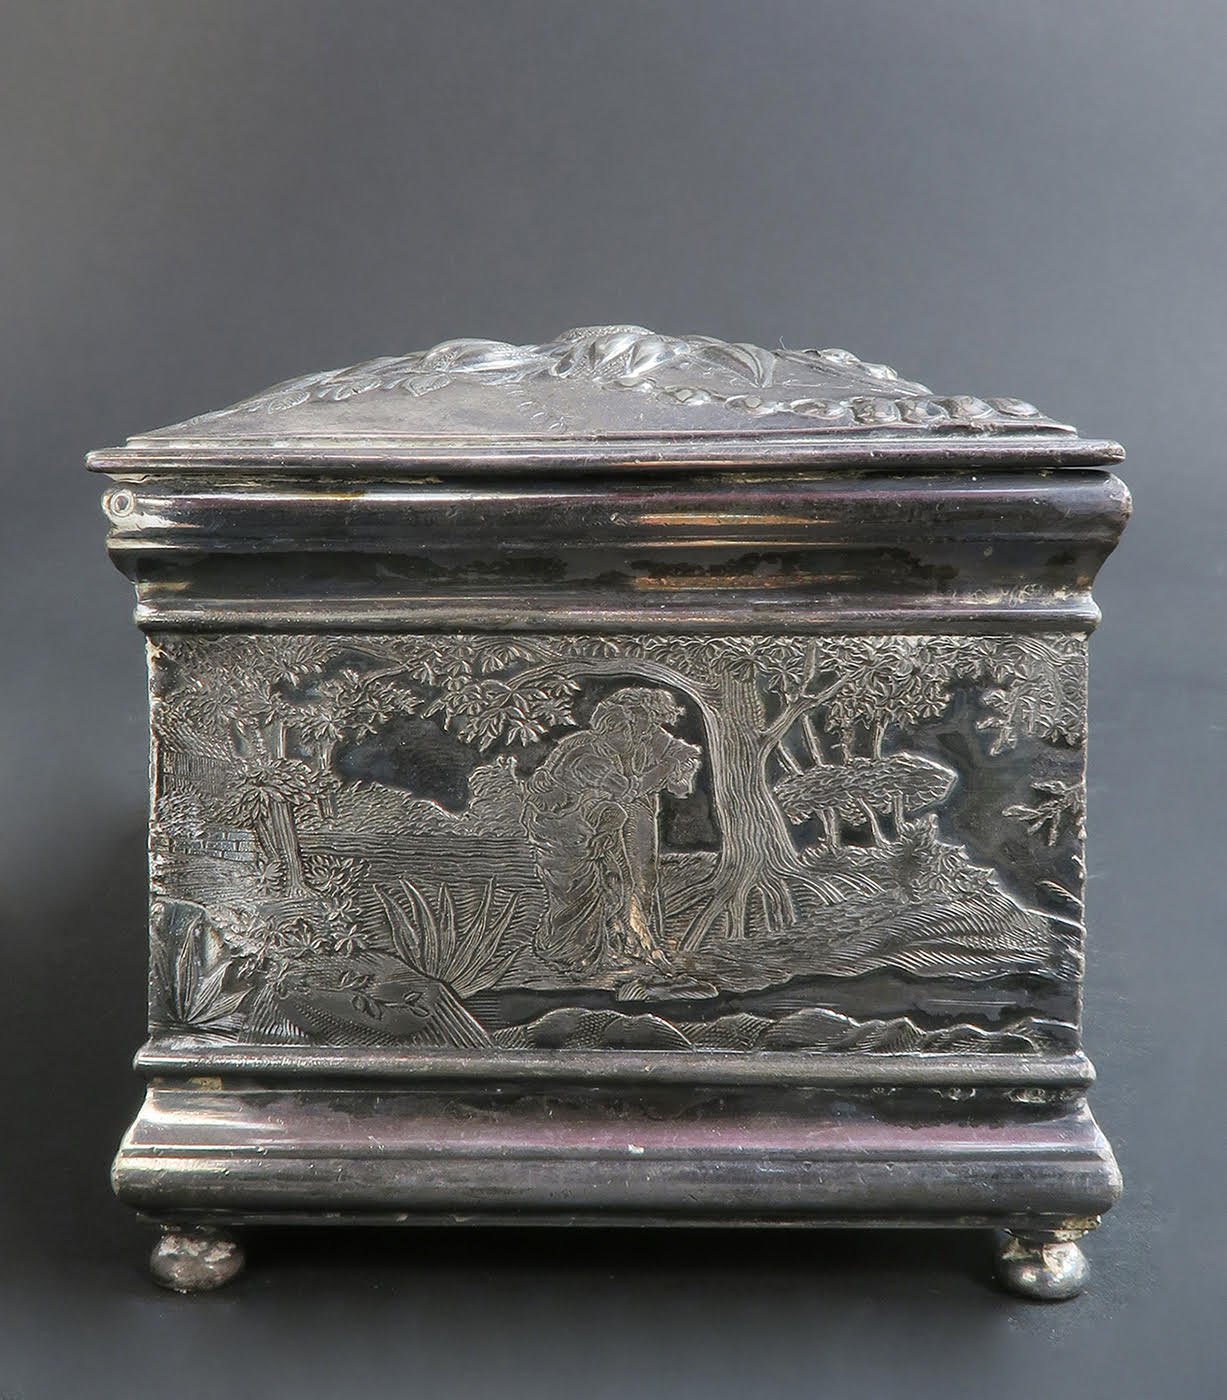 Fine 19th C. Silver-Plated Jewelry Box - Image 12 of 14